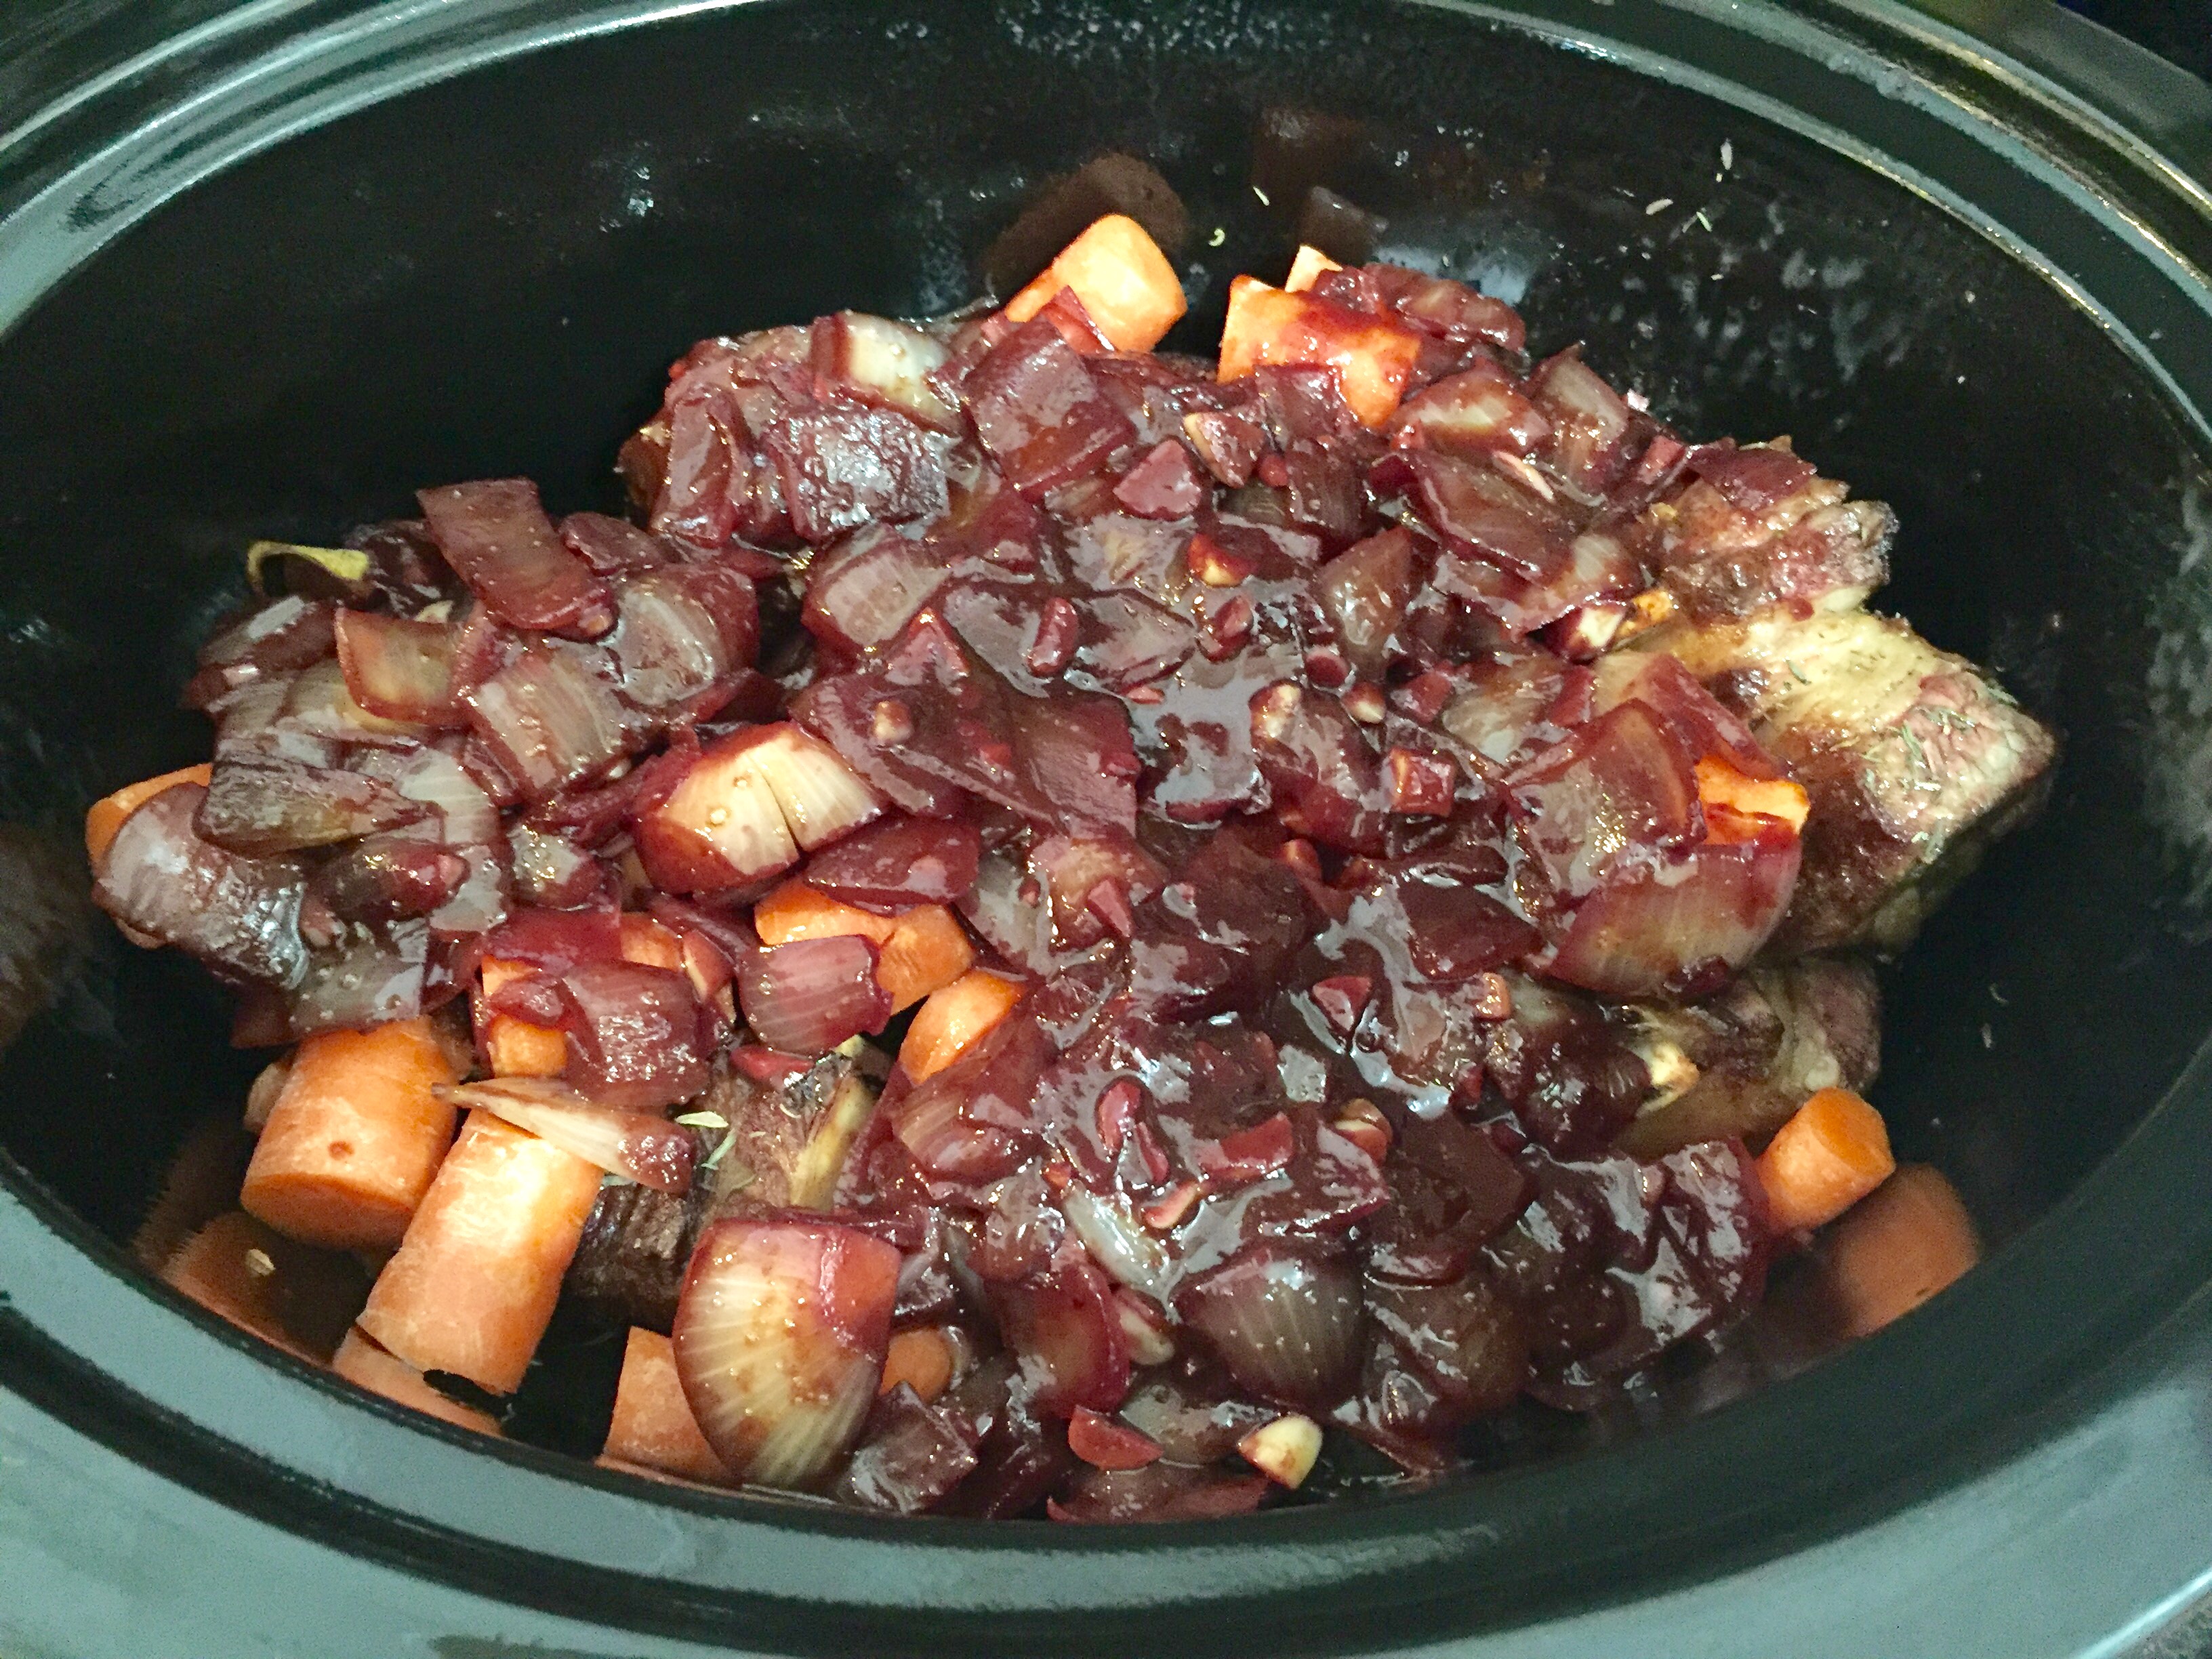 Red wine education over short ribs in slow cooker